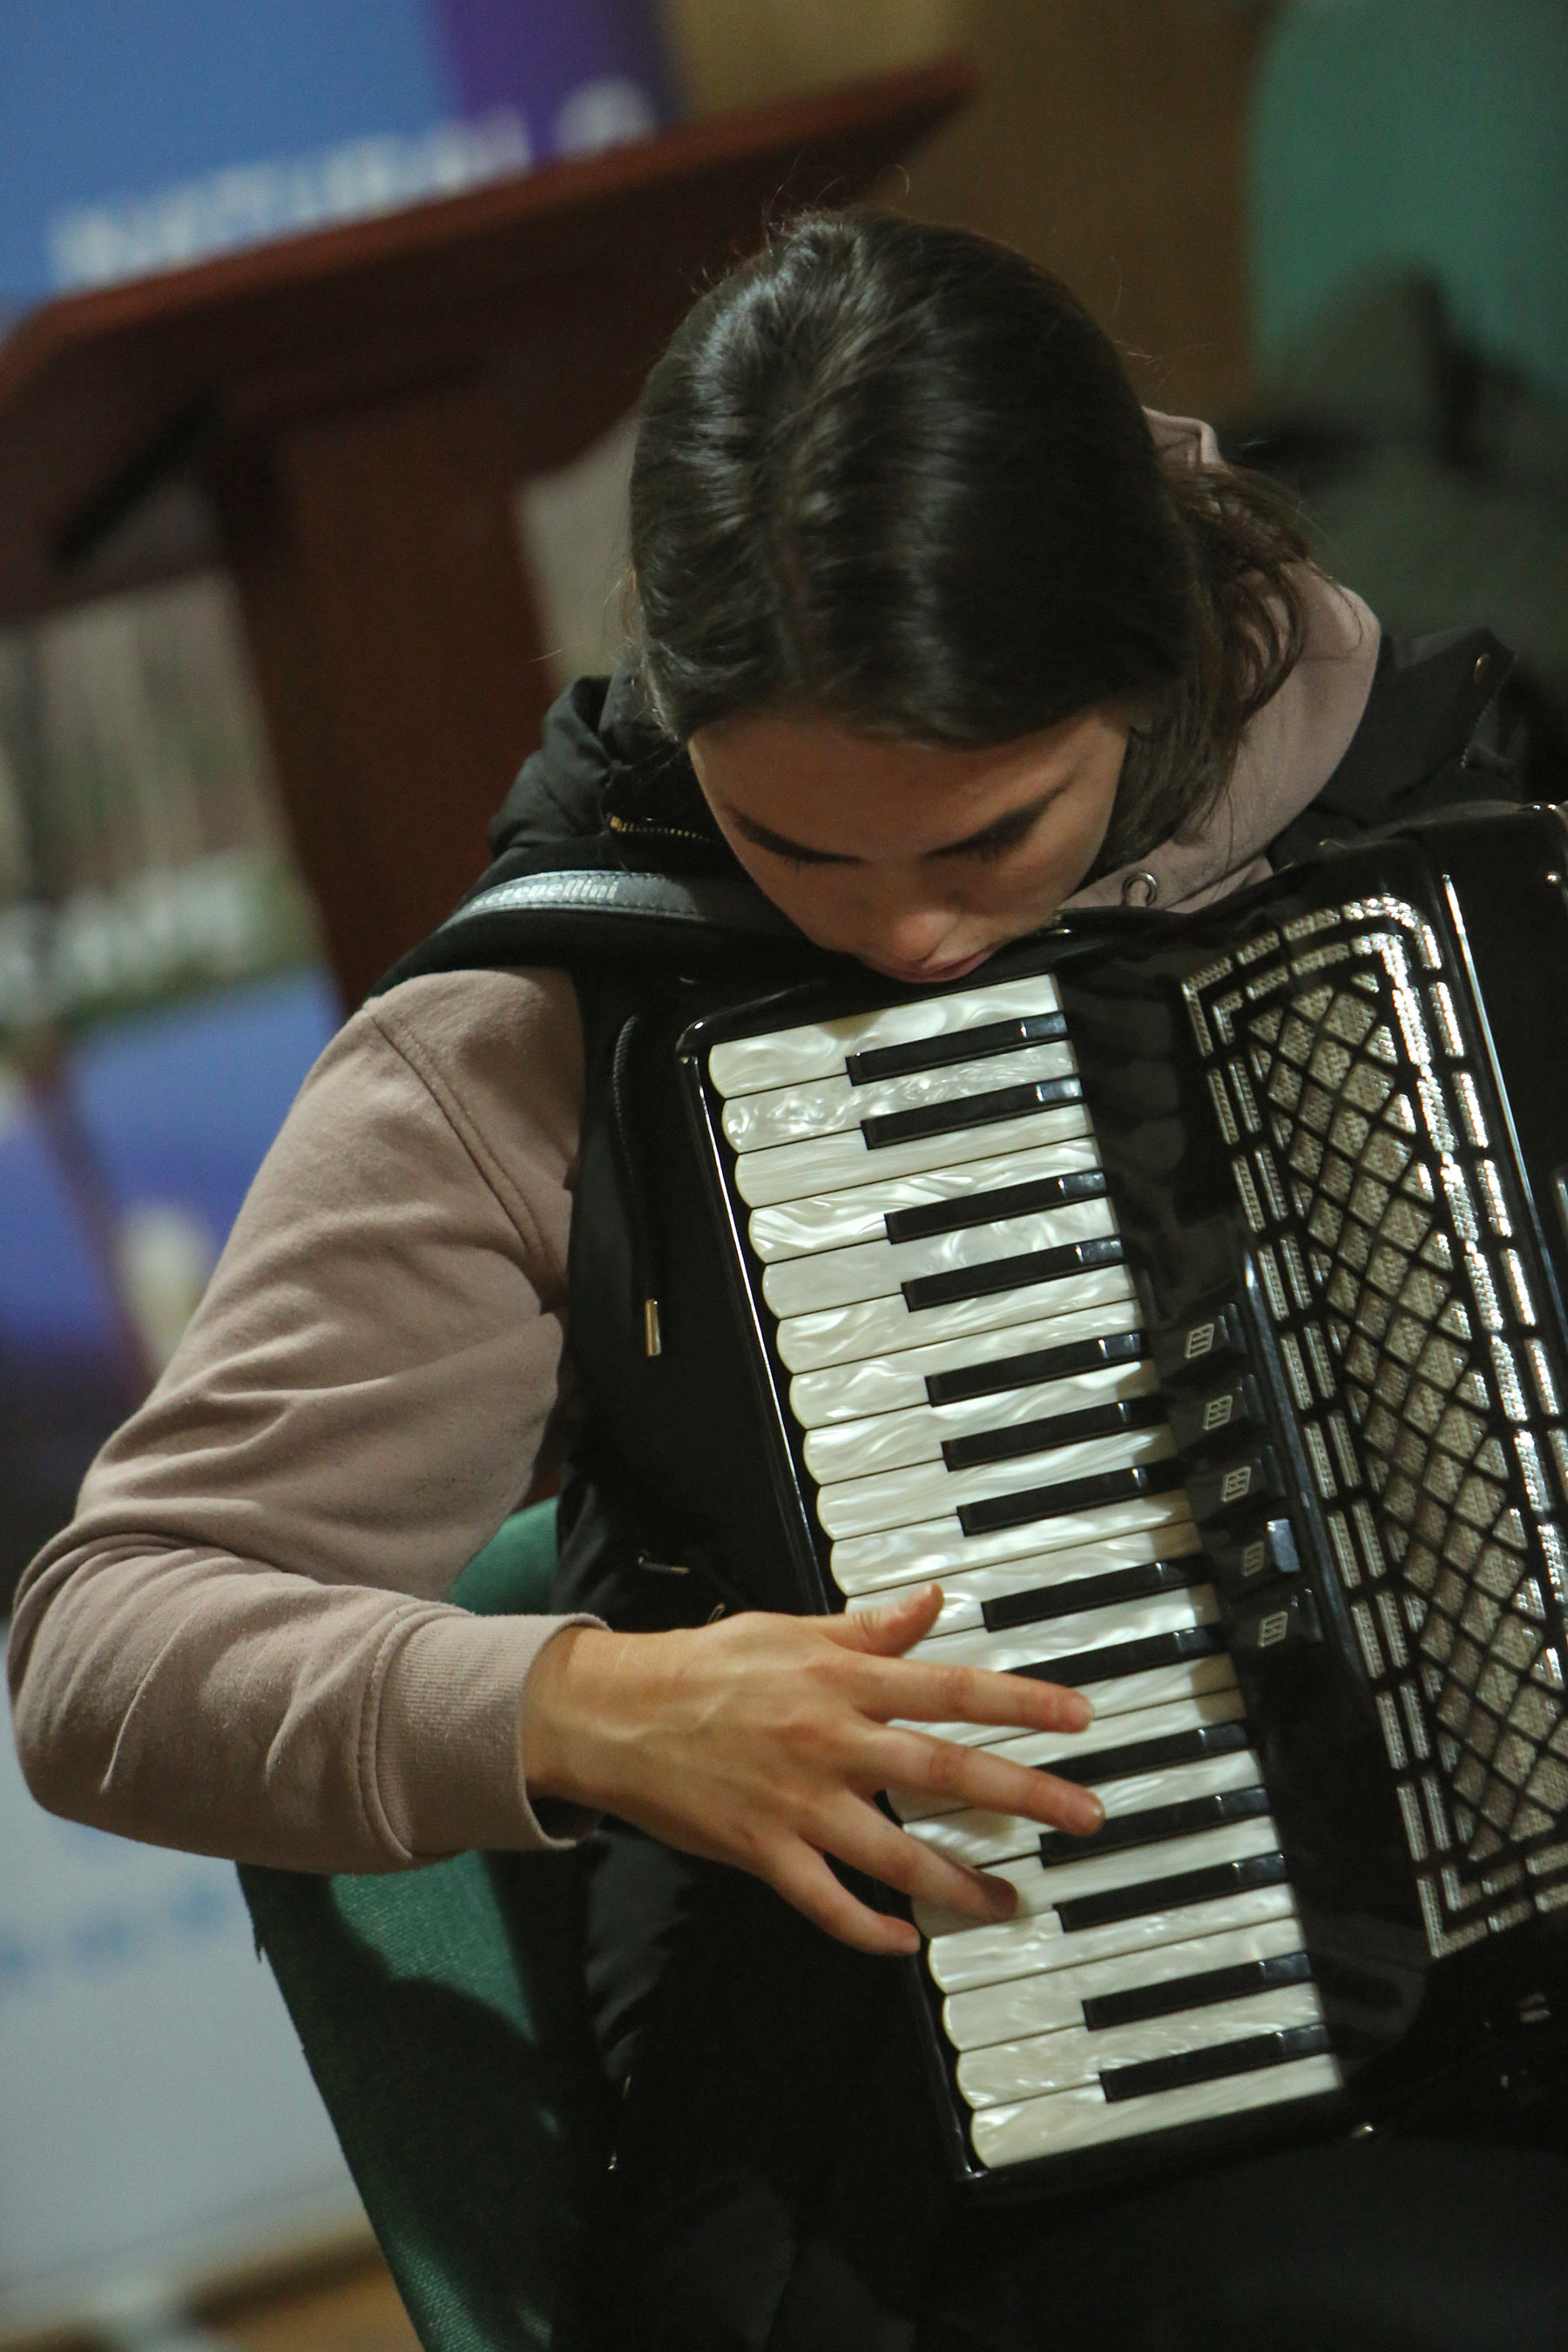 Sinead Maguire, All Ireland Accordion champion playing at the event.